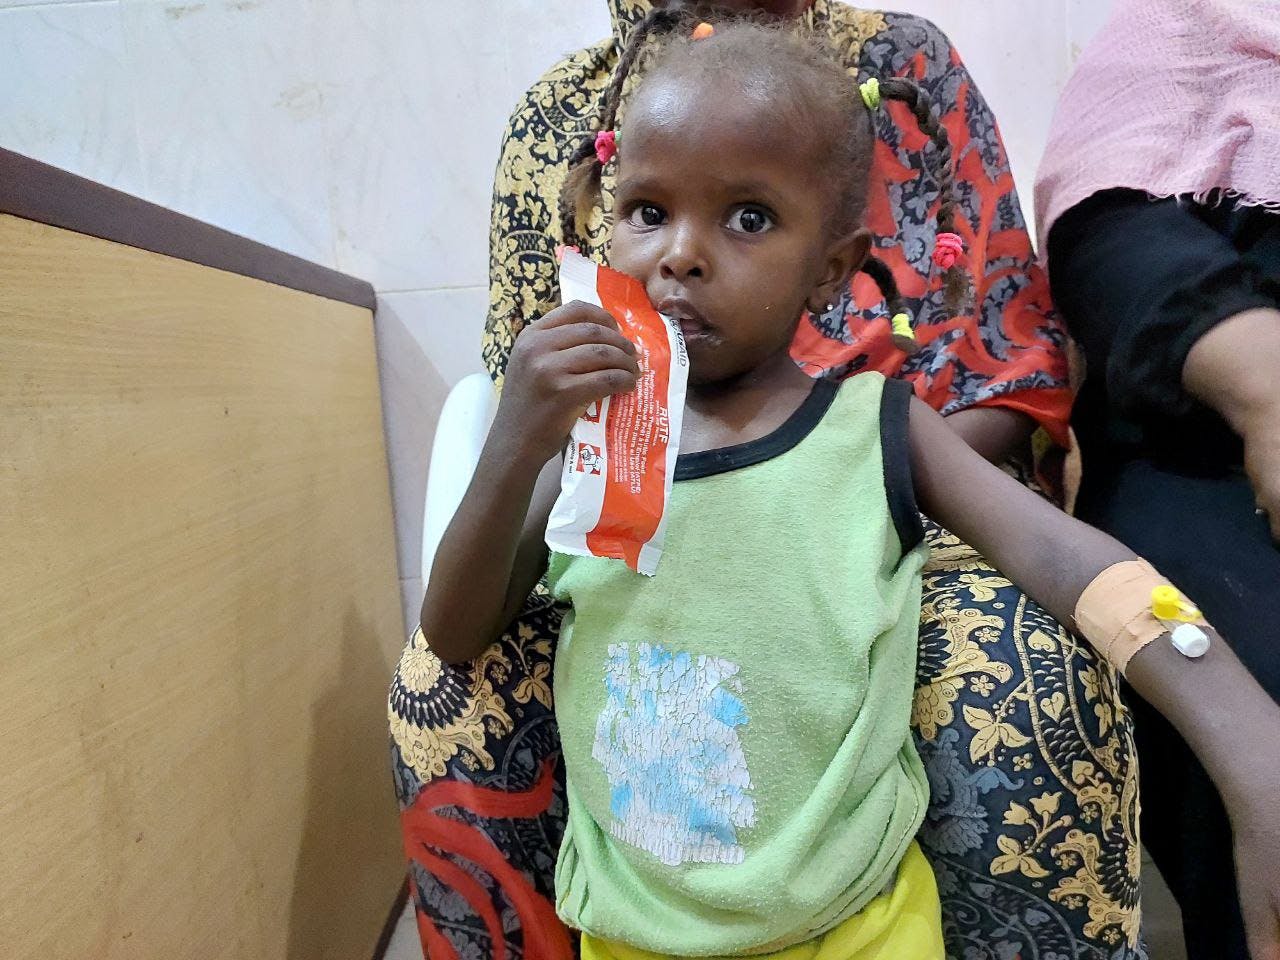 On 1 June, 3-year-old daughter, AlBatoul Taj-Elsir eats ready-to-use-therapeutic food (RUTF) in the nutrition ward at Dongola specialized hospital, where she is receiving treatment for severe acute malnutrition.